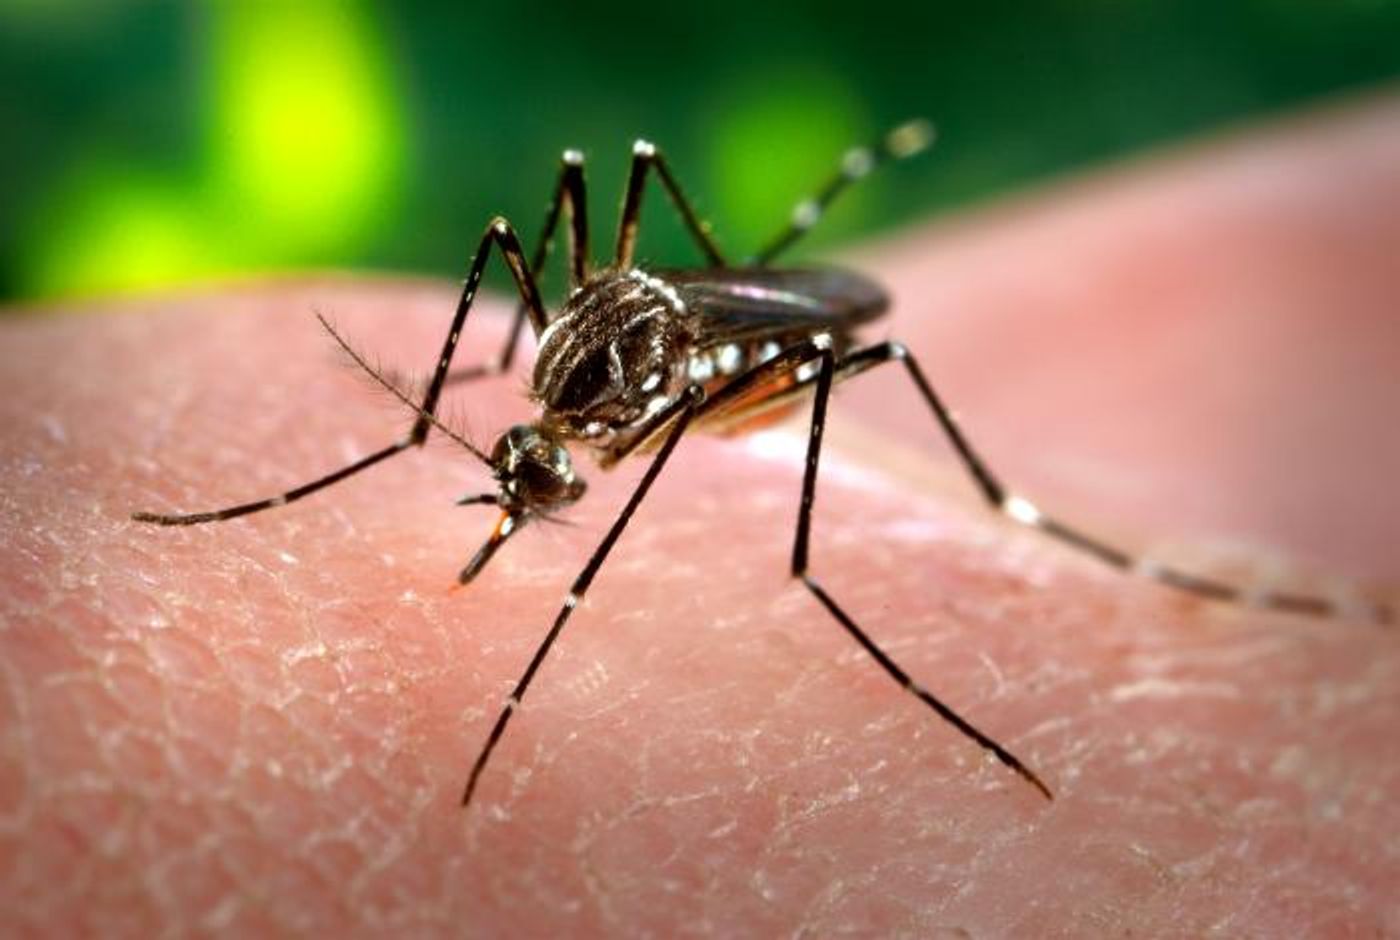 The Aedes aegypti mosquito is responsible for spreading multiple viruses in the Flaviviridae family, including Zika and Dengue. Source: PHIL, CDC